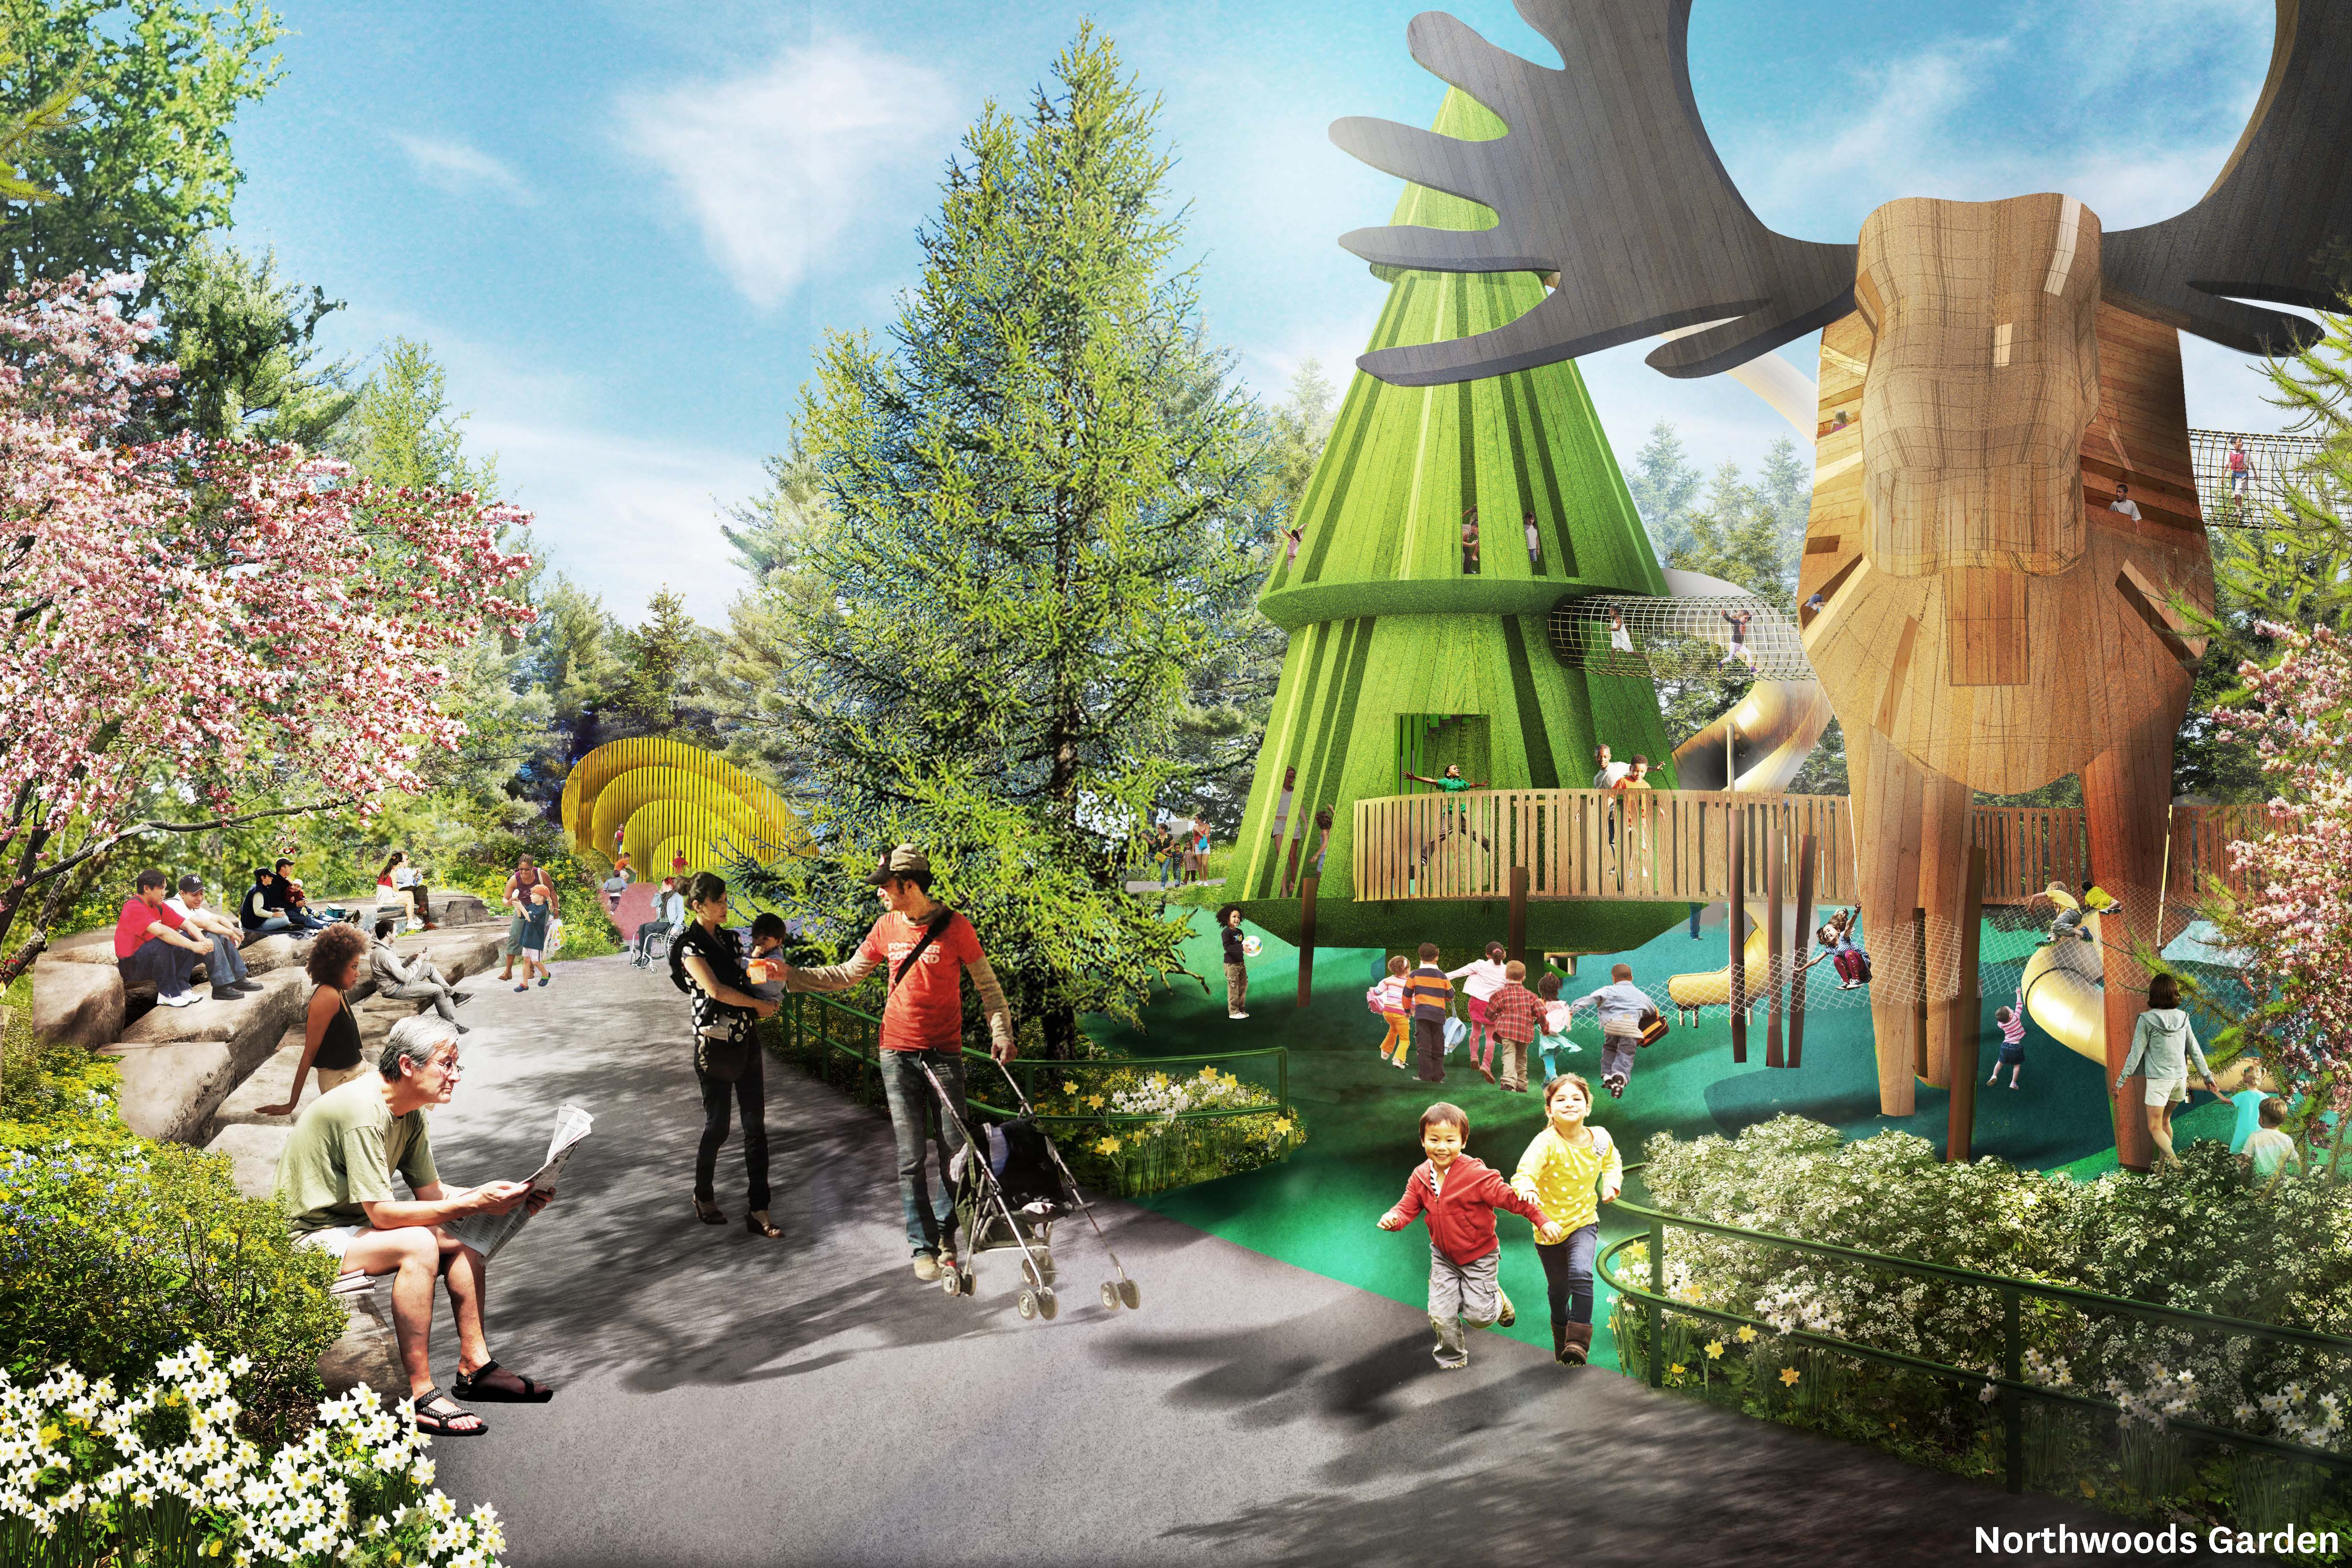 A rendering of a playground in a park, showcasing vibrant play structures and joyful children.